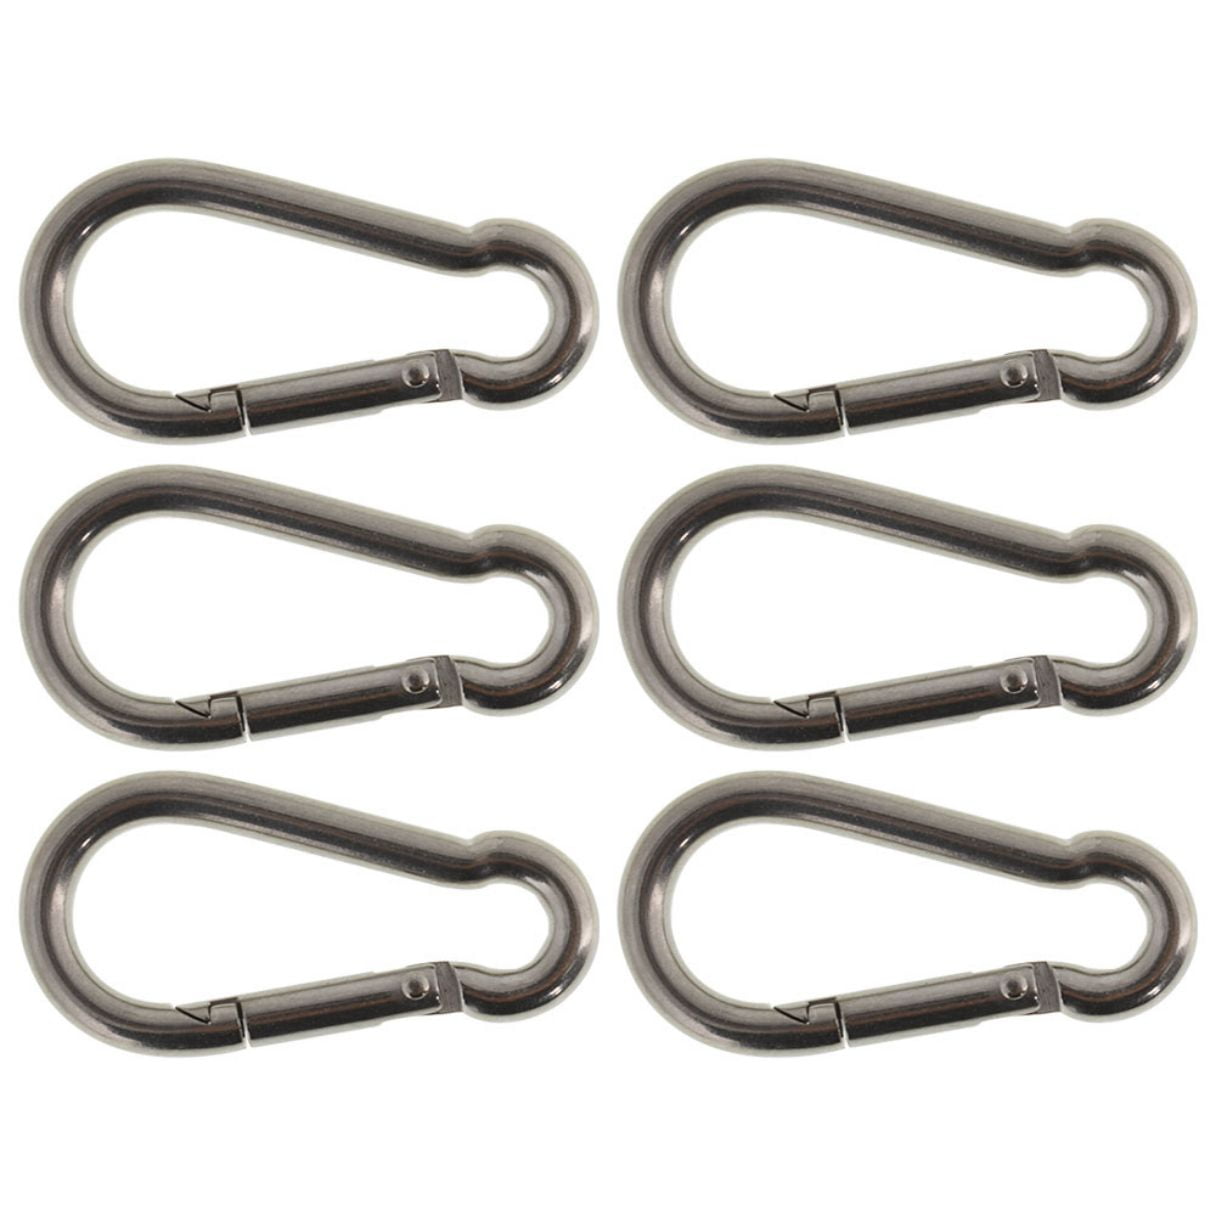 6pcs Durable Metal Carabiner Clip Style Spring Key Chain Keyring A* 